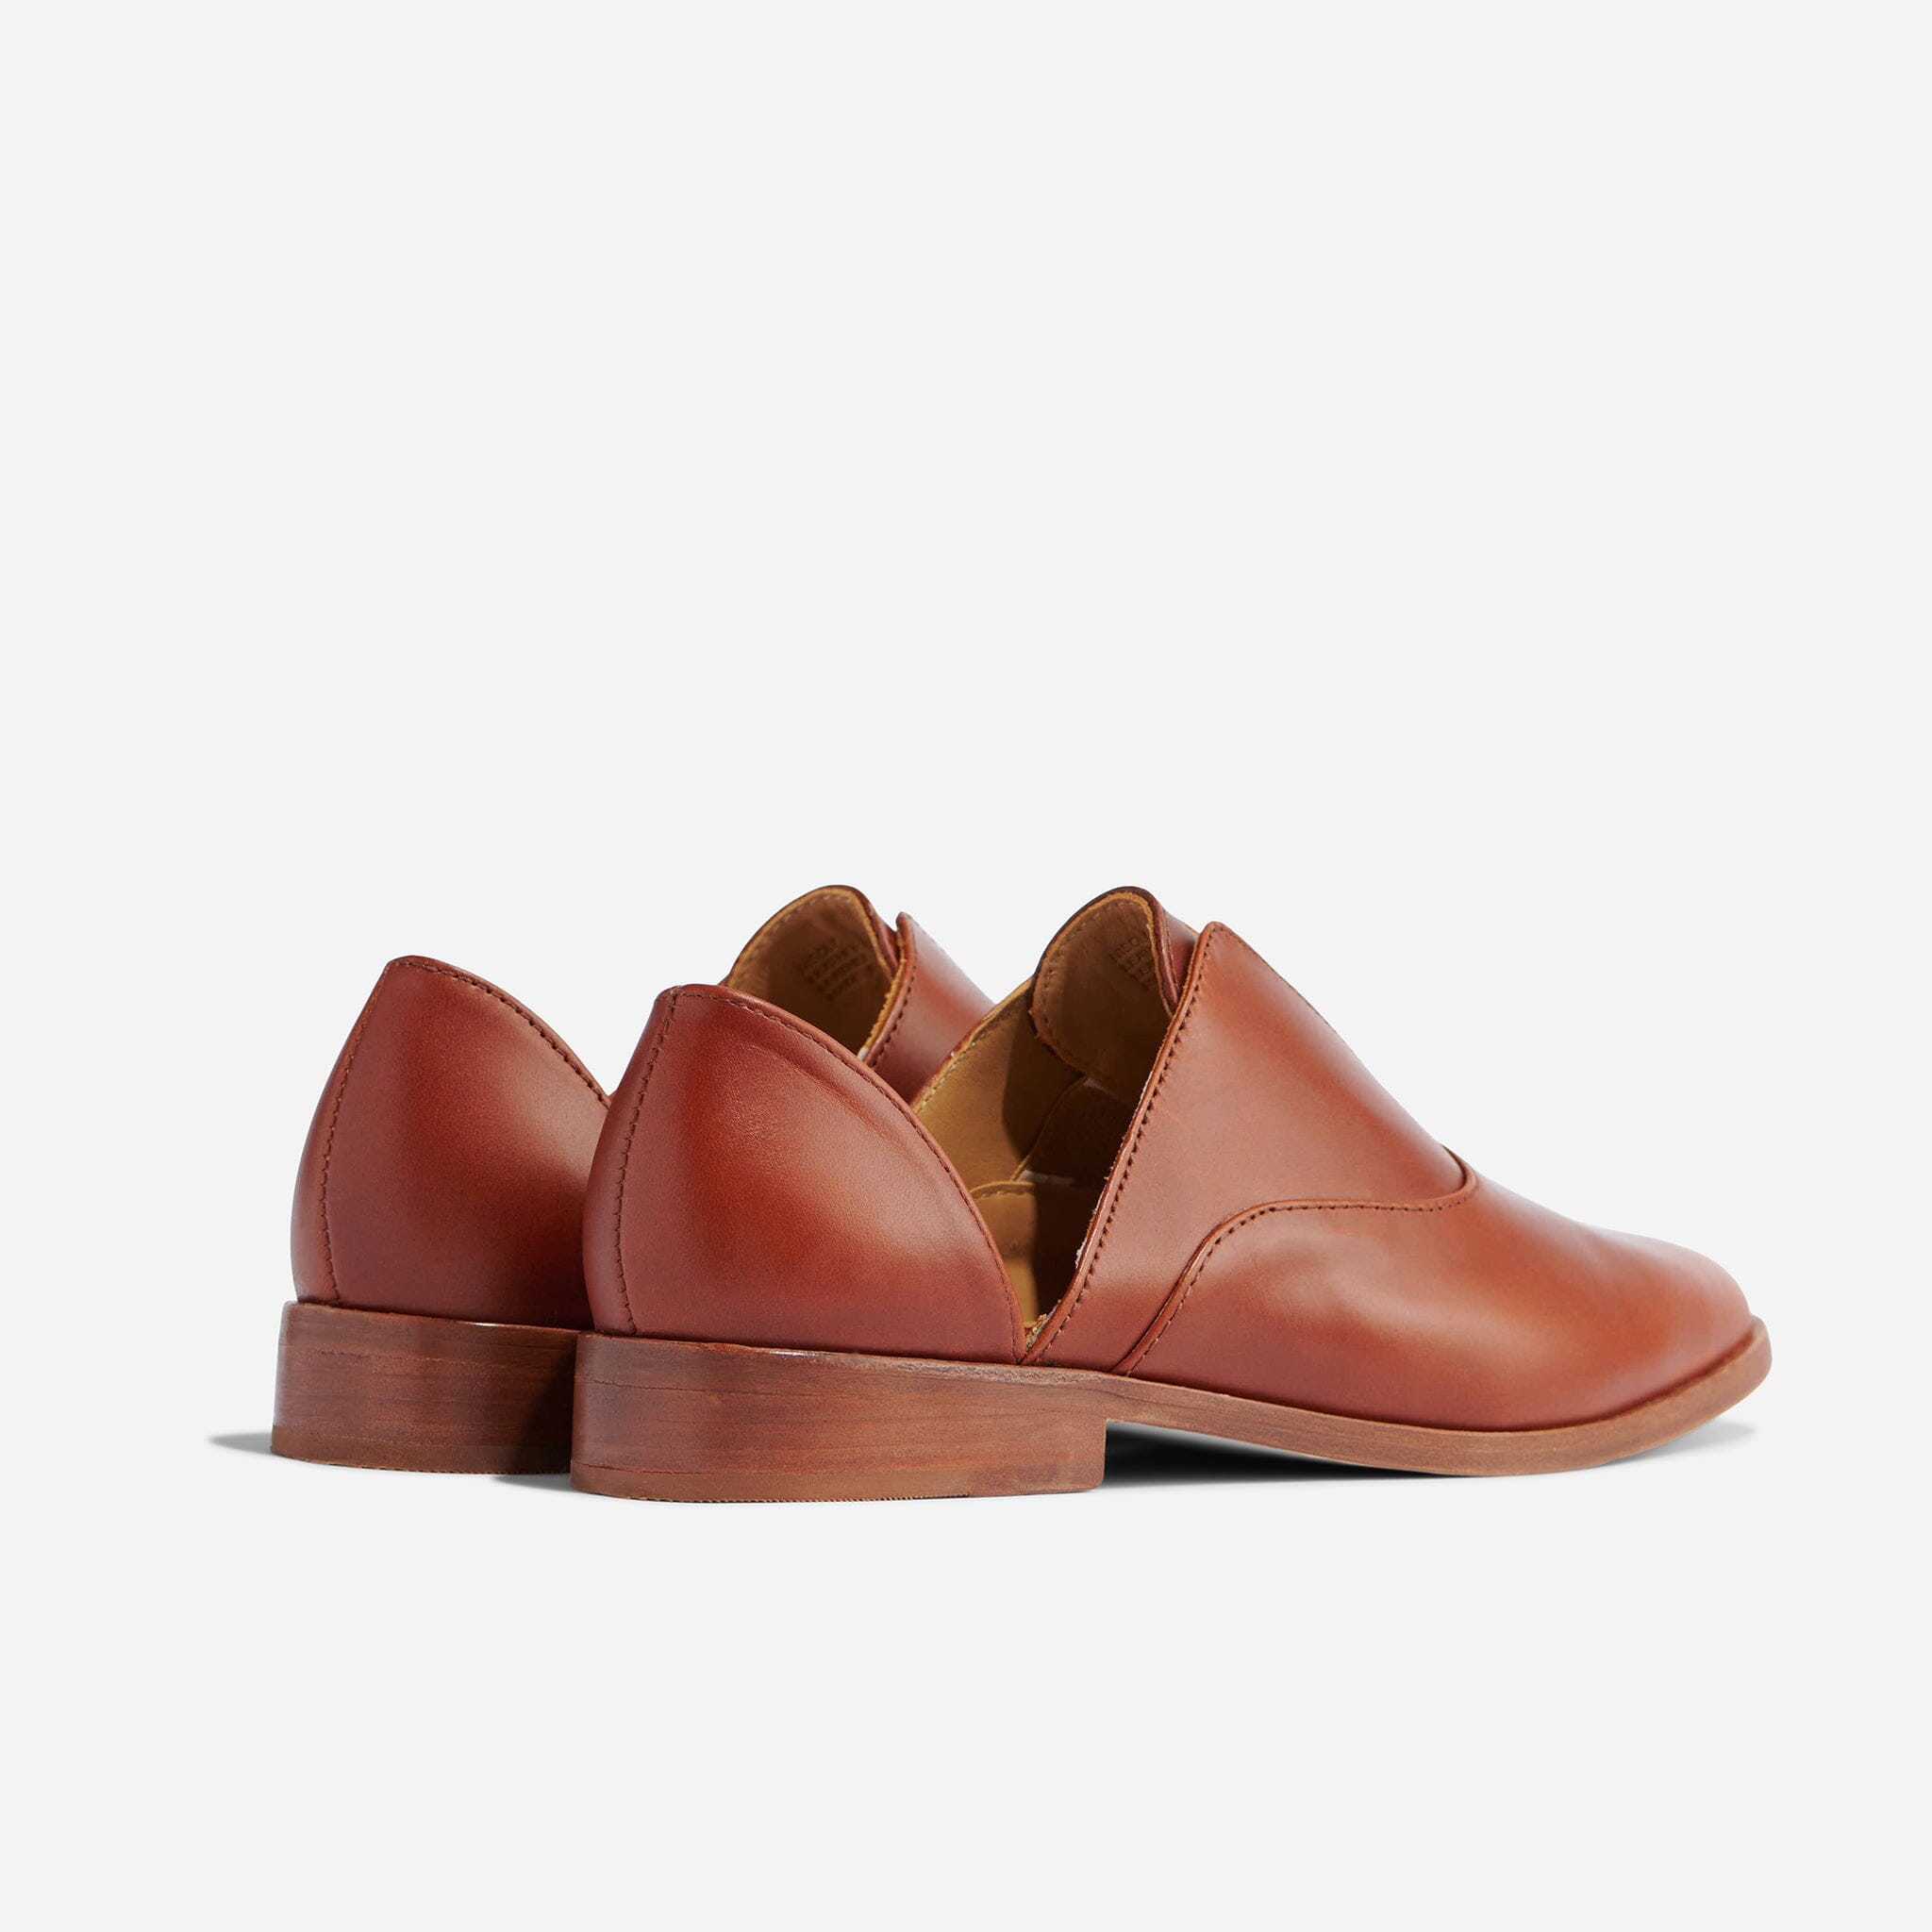 Women's d'Orsay Oxford, Ethically Made